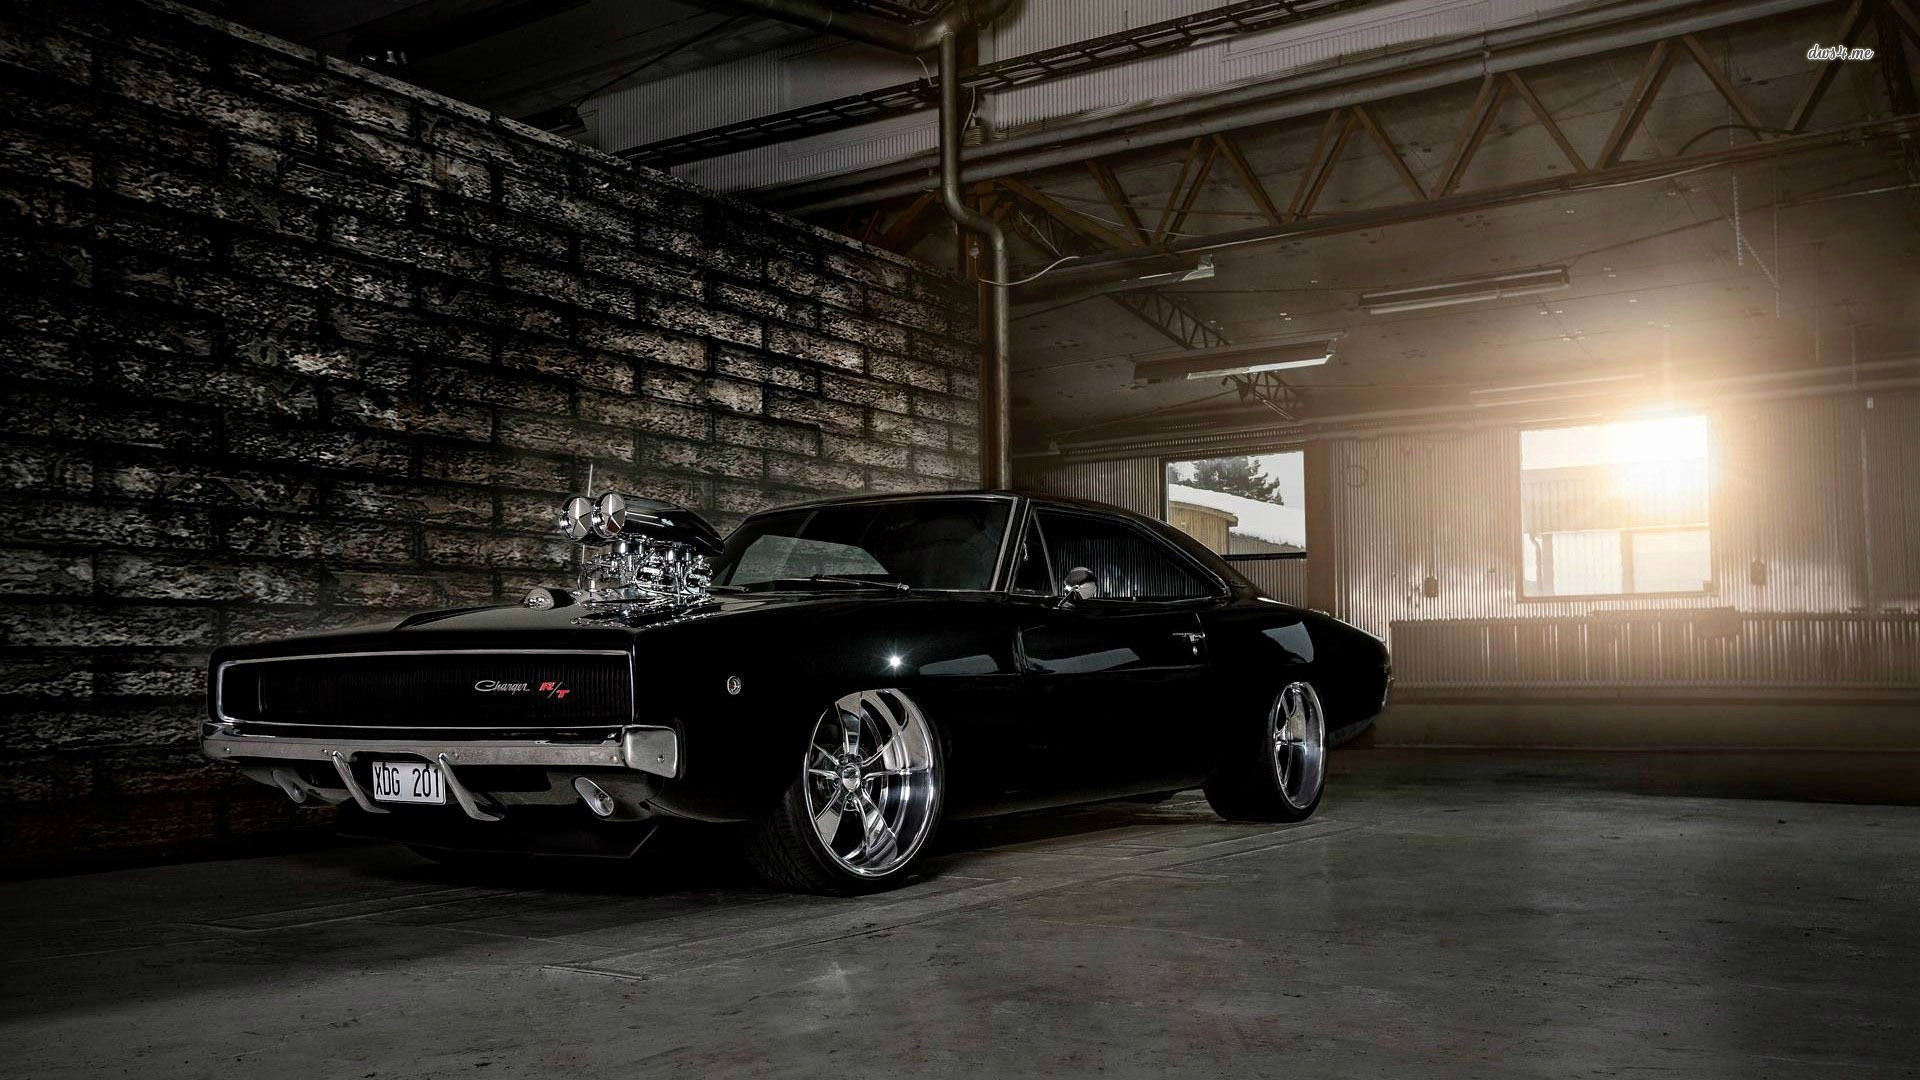 1920x1080 Nice Car Wallpaper Awesome 69 Dodge Charger Wallpapers Wallpaper Cave  Wallpapers